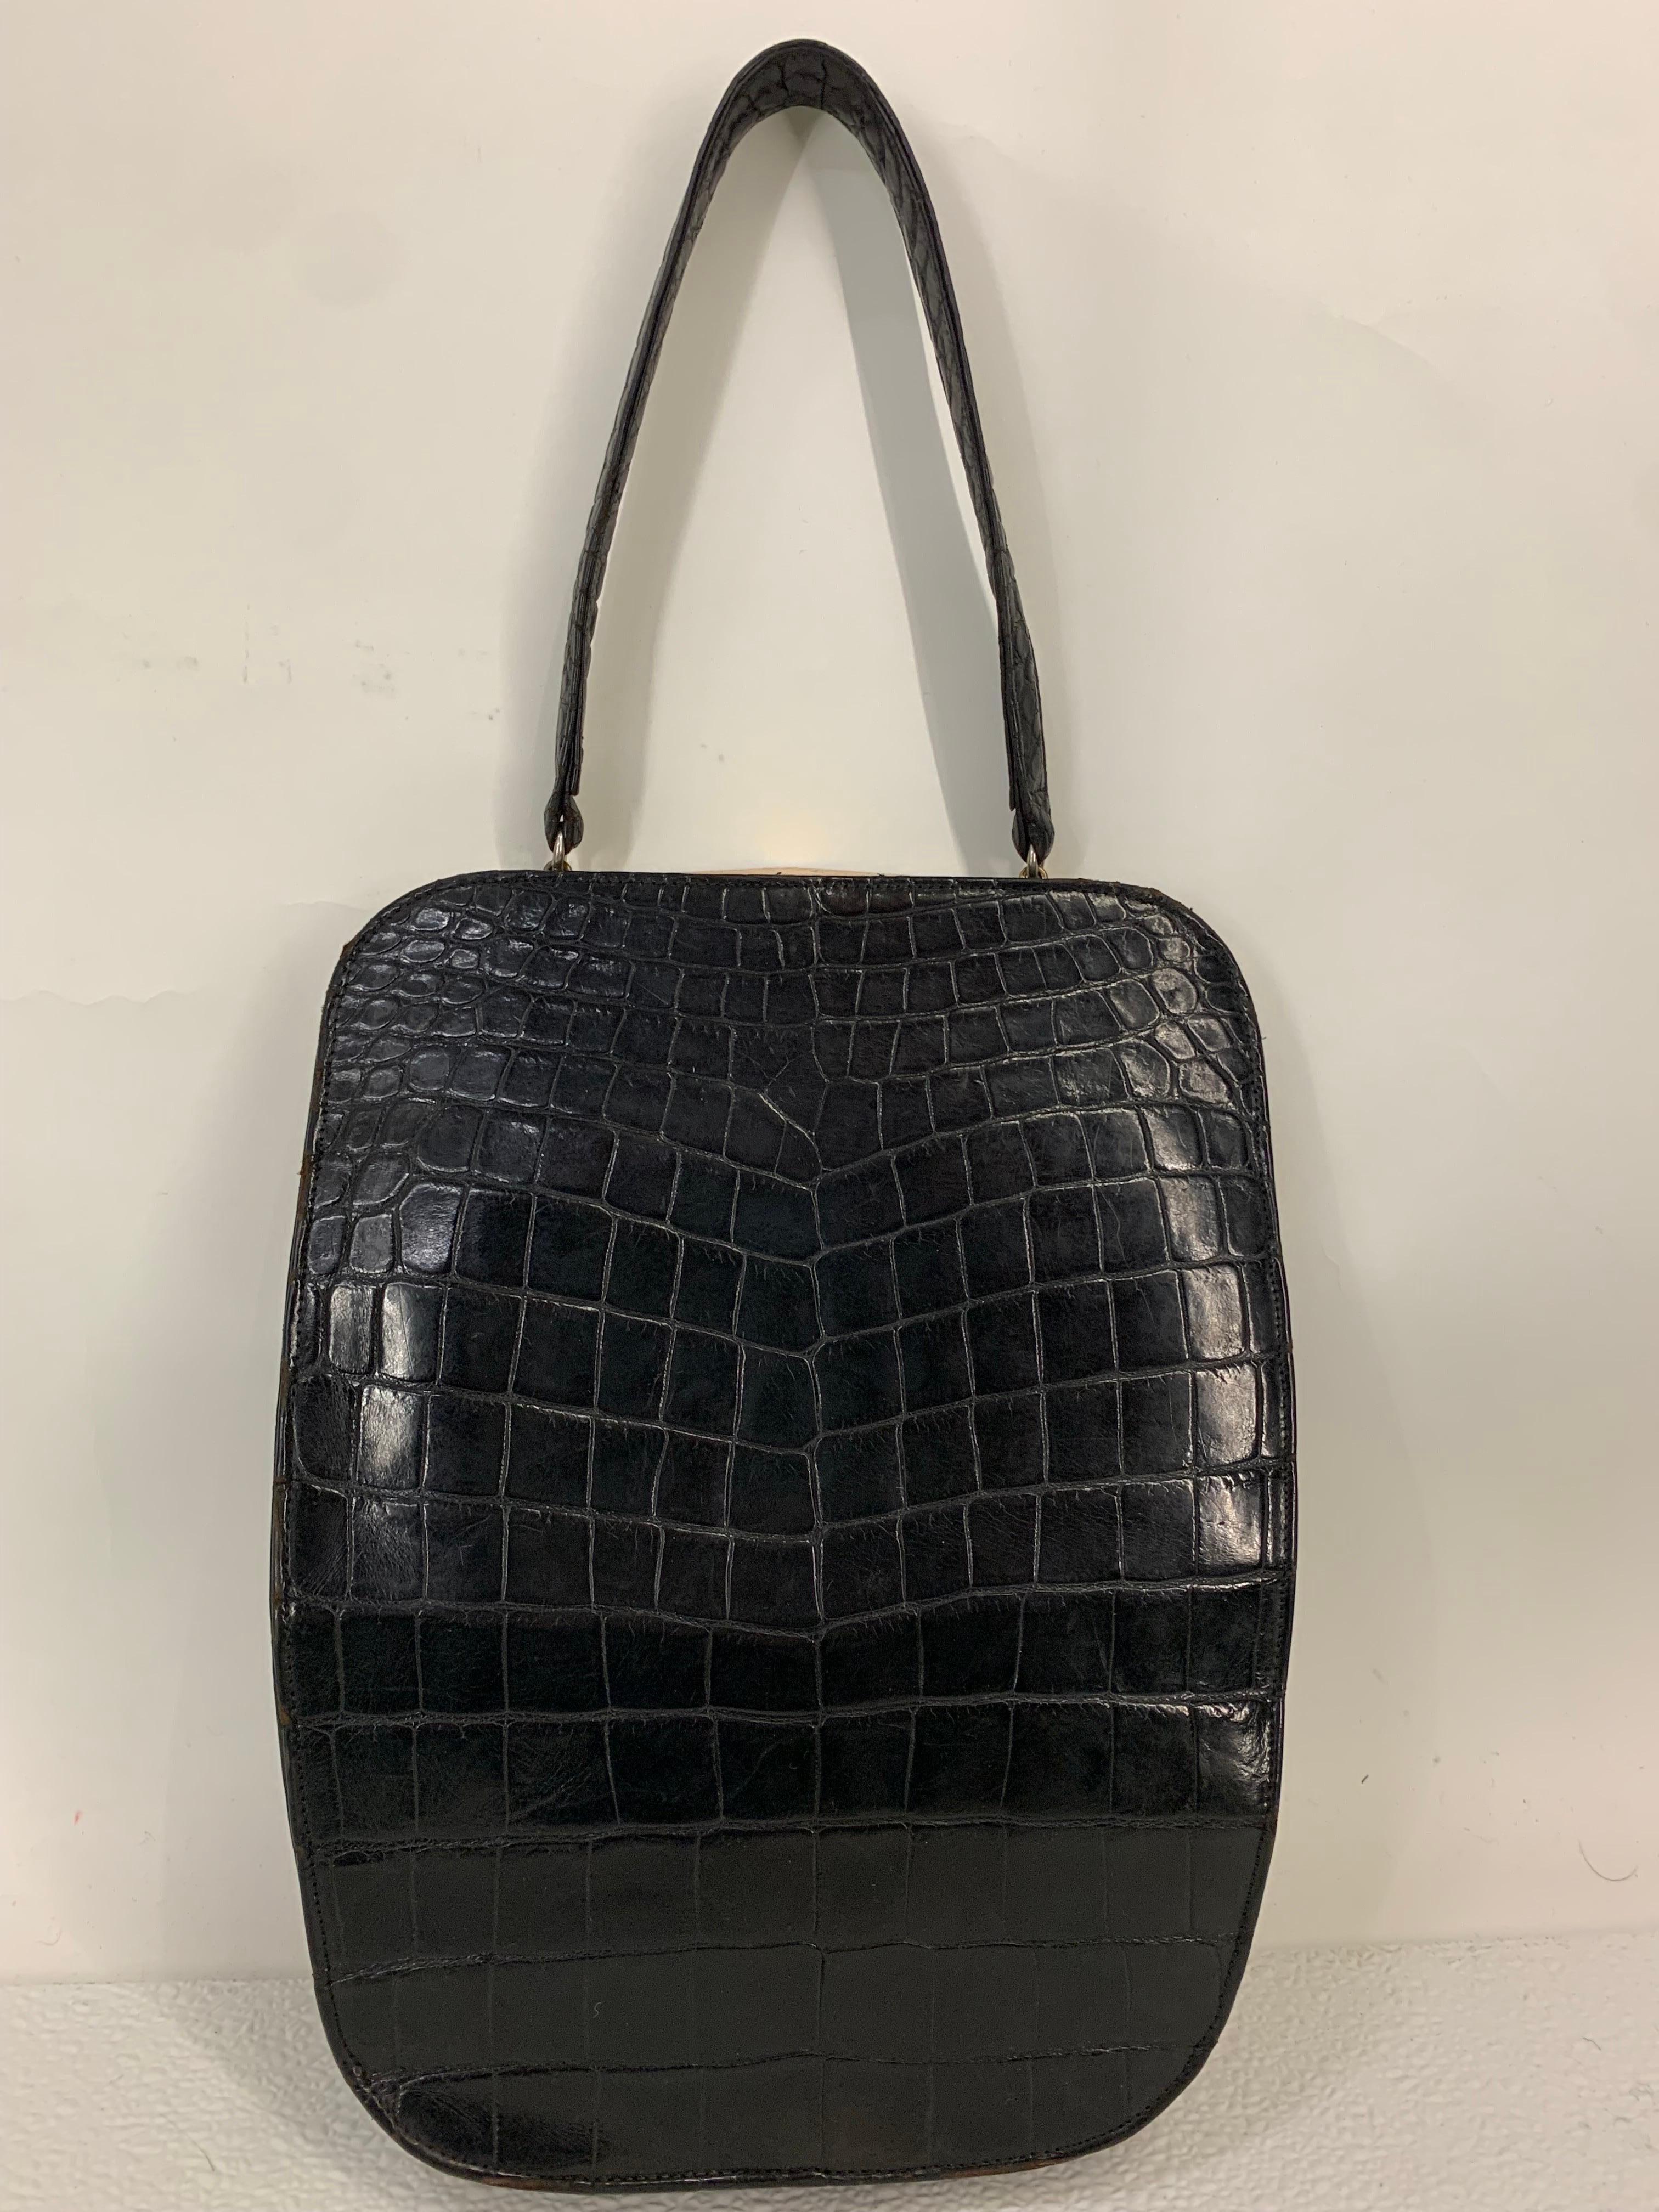 1950s Koret Genuine Black Alligator Handbag w Rare & Unusual Asymmetrical Closure. Inner lining and original coin purse is Koret signature red leather.  Upper right hand corner is cut away in tiers to expose gold-tone frame of bag. Super cute,